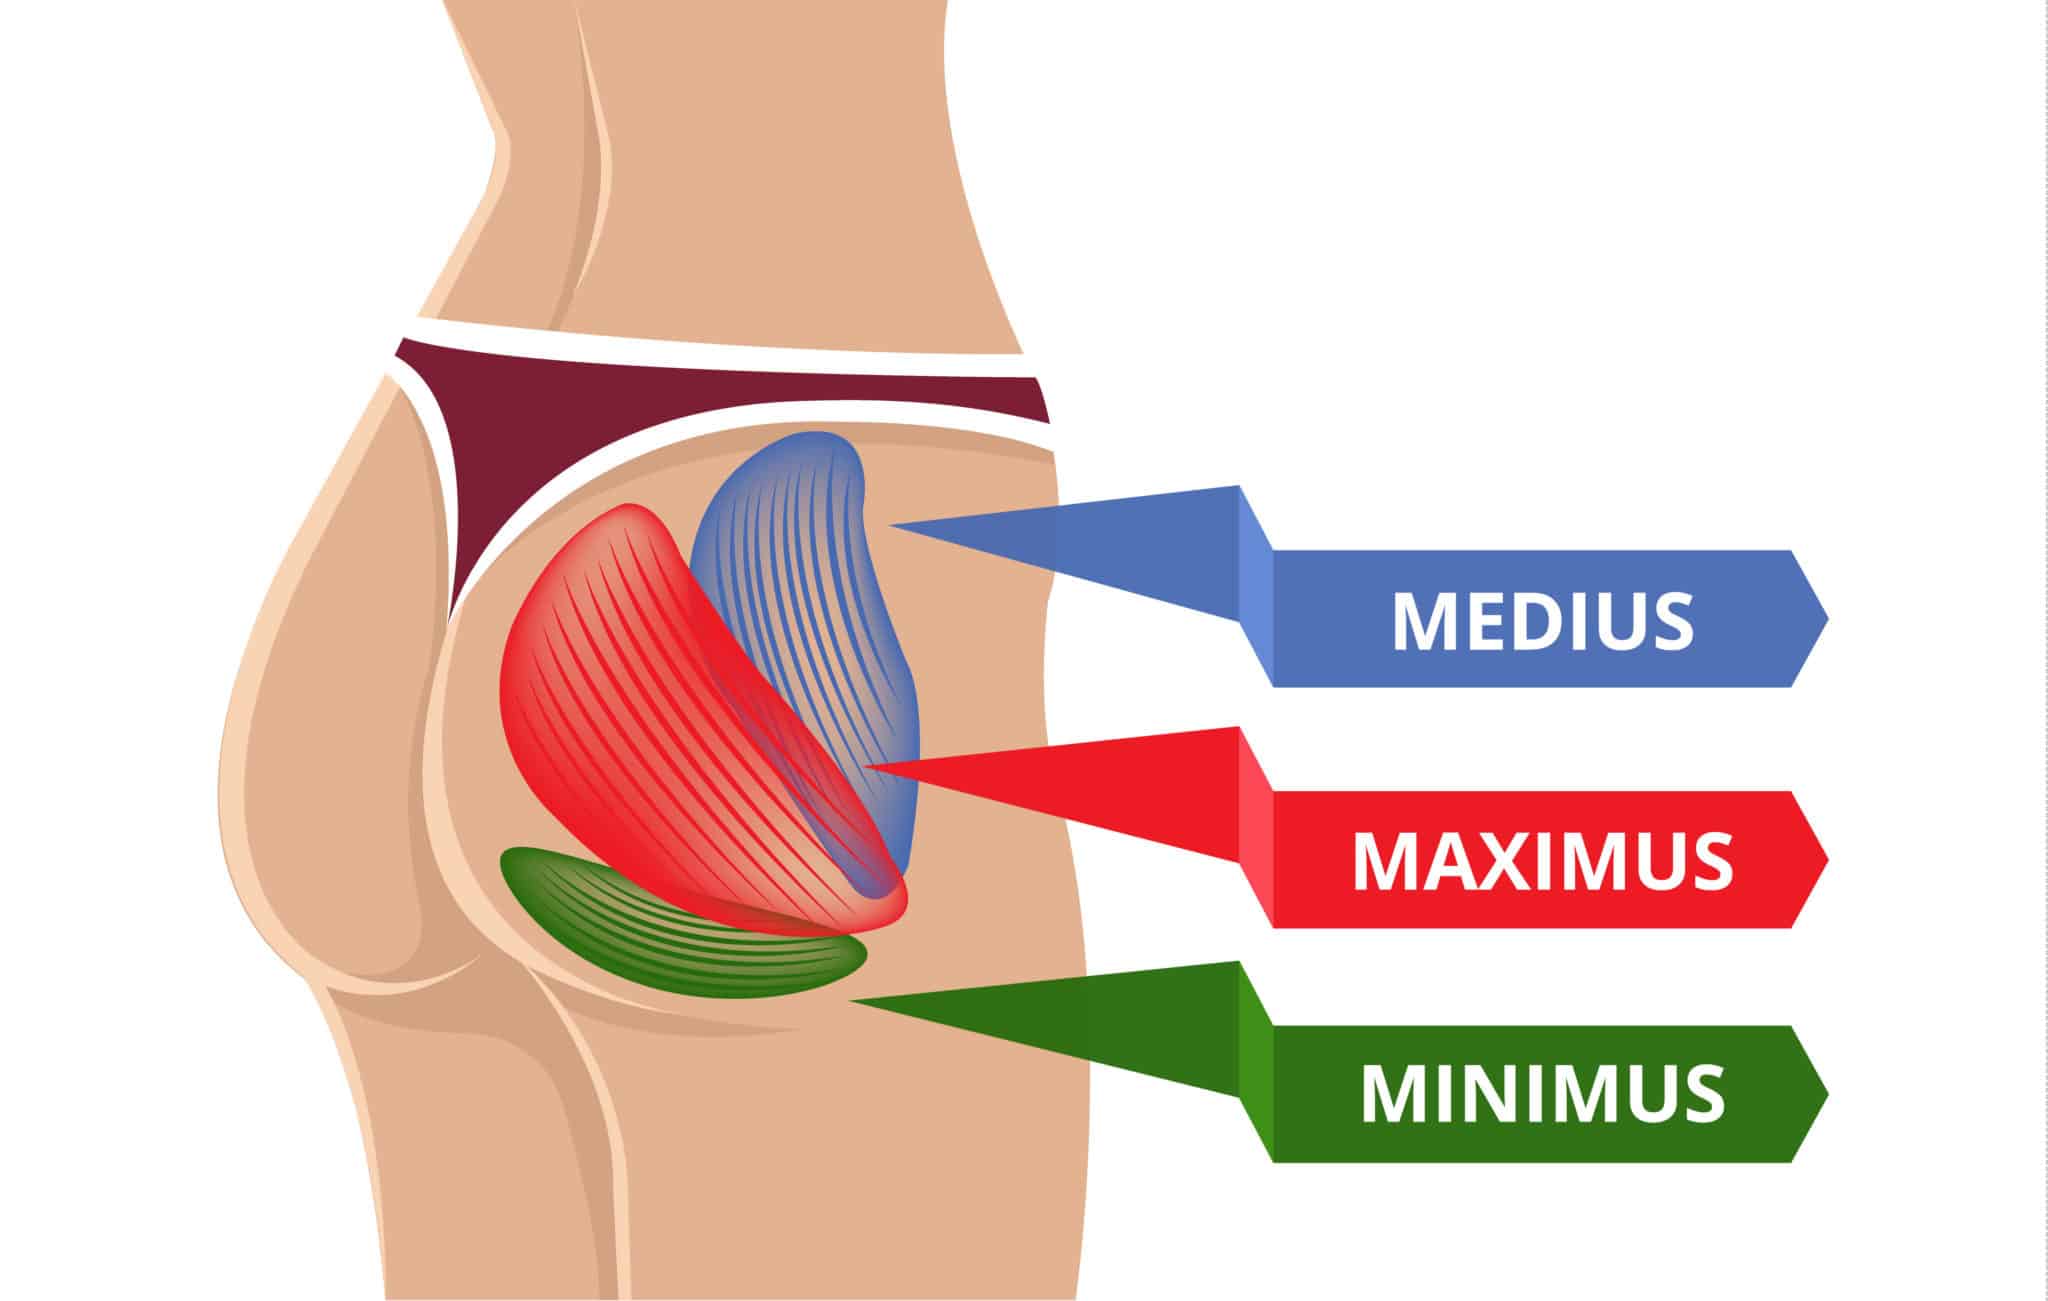 Image of the different muscles in the glutes: medius, maximus, and minimus